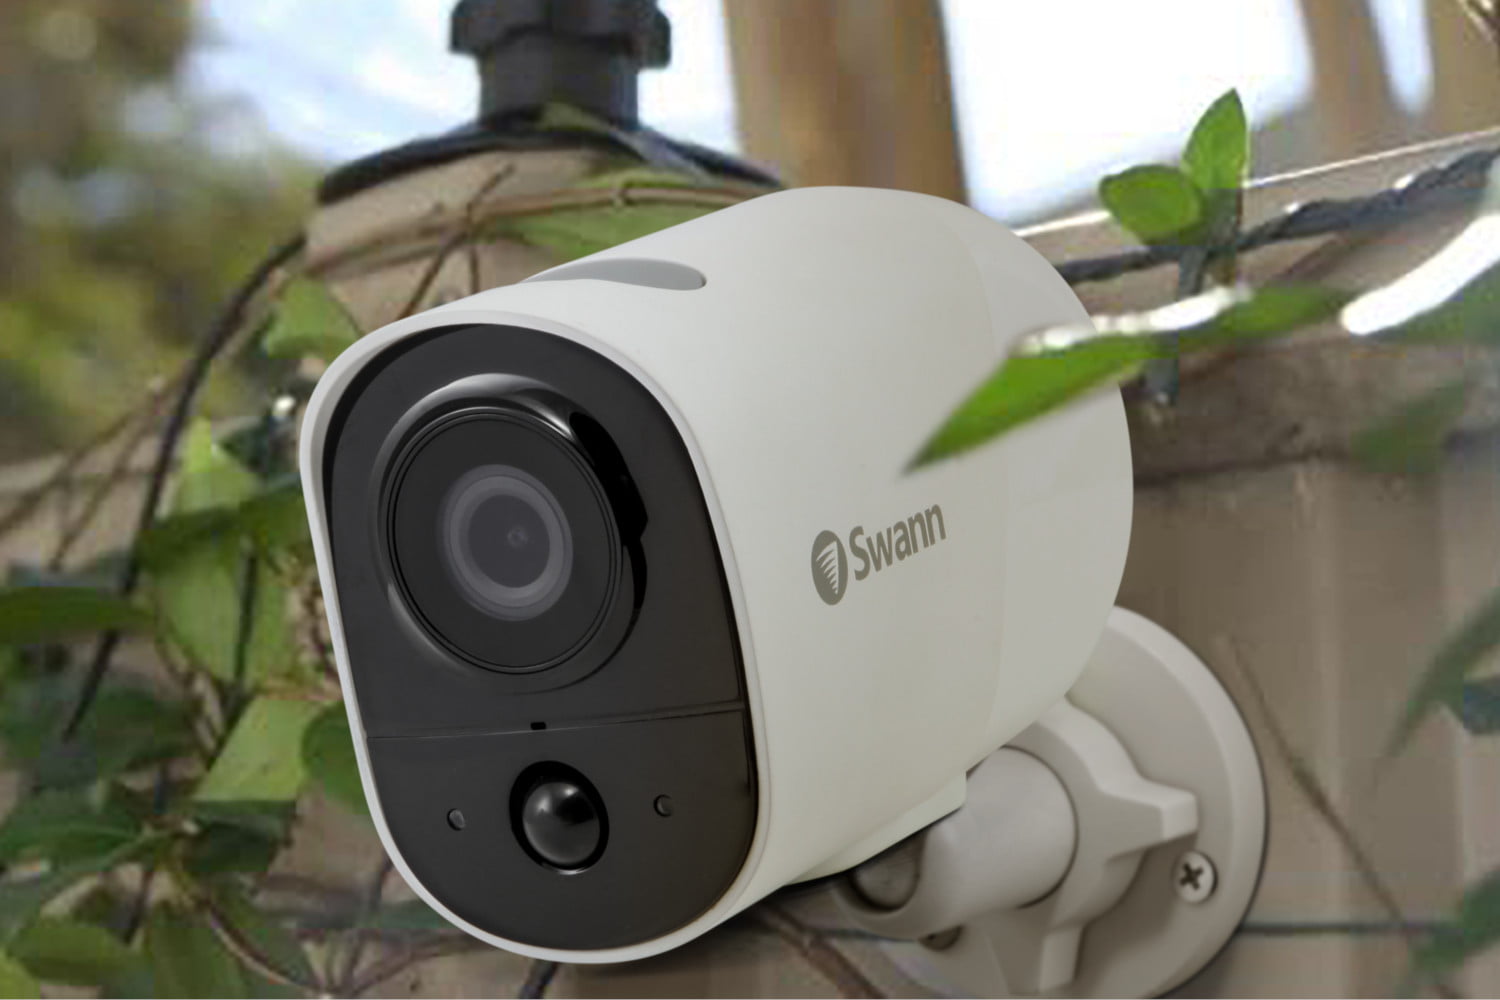 Swann Xtreem security camera boasts 6-month battery, heat and motion sensing